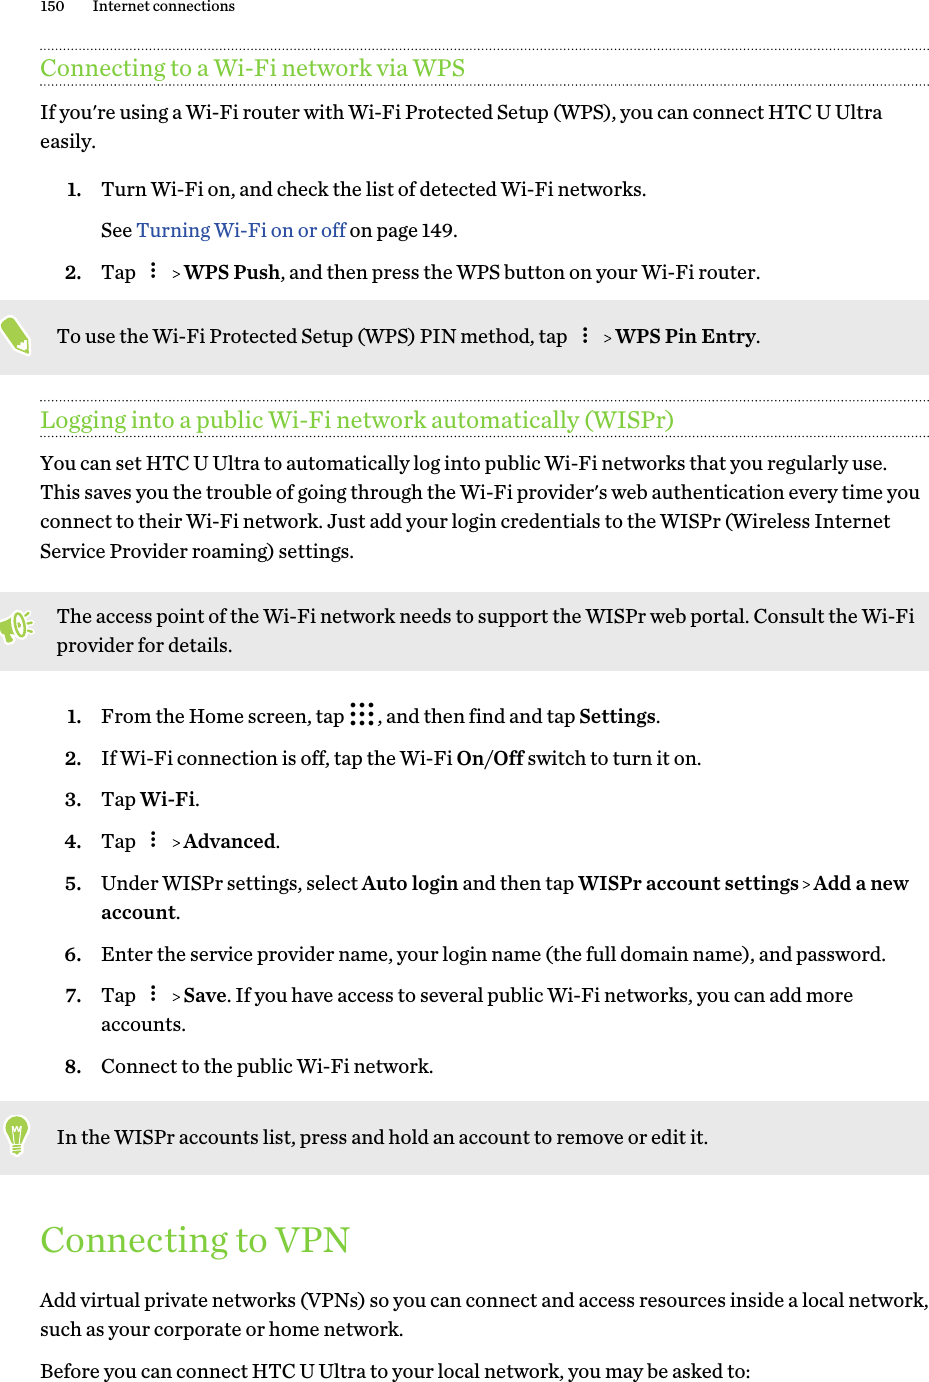 Connecting to a Wi-Fi network via WPSIf you&apos;re using a Wi-Fi router with Wi-Fi Protected Setup (WPS), you can connect HTC U Ultraeasily.1. Turn Wi-Fi on, and check the list of detected Wi-Fi networks. See Turning Wi-Fi on or off on page 149.2. Tap     WPS Push, and then press the WPS button on your Wi-Fi router. To use the Wi-Fi Protected Setup (WPS) PIN method, tap     WPS Pin Entry.Logging into a public Wi-Fi network automatically (WISPr)You can set HTC U Ultra to automatically log into public Wi-Fi networks that you regularly use.This saves you the trouble of going through the Wi-Fi provider&apos;s web authentication every time youconnect to their Wi-Fi network. Just add your login credentials to the WISPr (Wireless InternetService Provider roaming) settings.The access point of the Wi-Fi network needs to support the WISPr web portal. Consult the Wi-Fiprovider for details.1. From the Home screen, tap  , and then find and tap Settings.2. If Wi-Fi connection is off, tap the Wi-Fi On/Off switch to turn it on.3. Tap Wi-Fi.4. Tap     Advanced.5. Under WISPr settings, select Auto login and then tap WISPr account settings   Add a newaccount.6. Enter the service provider name, your login name (the full domain name), and password.7. Tap     Save. If you have access to several public Wi-Fi networks, you can add moreaccounts.8. Connect to the public Wi-Fi network.In the WISPr accounts list, press and hold an account to remove or edit it.Connecting to VPNAdd virtual private networks (VPNs) so you can connect and access resources inside a local network,such as your corporate or home network.Before you can connect HTC U Ultra to your local network, you may be asked to:150 Internet connections